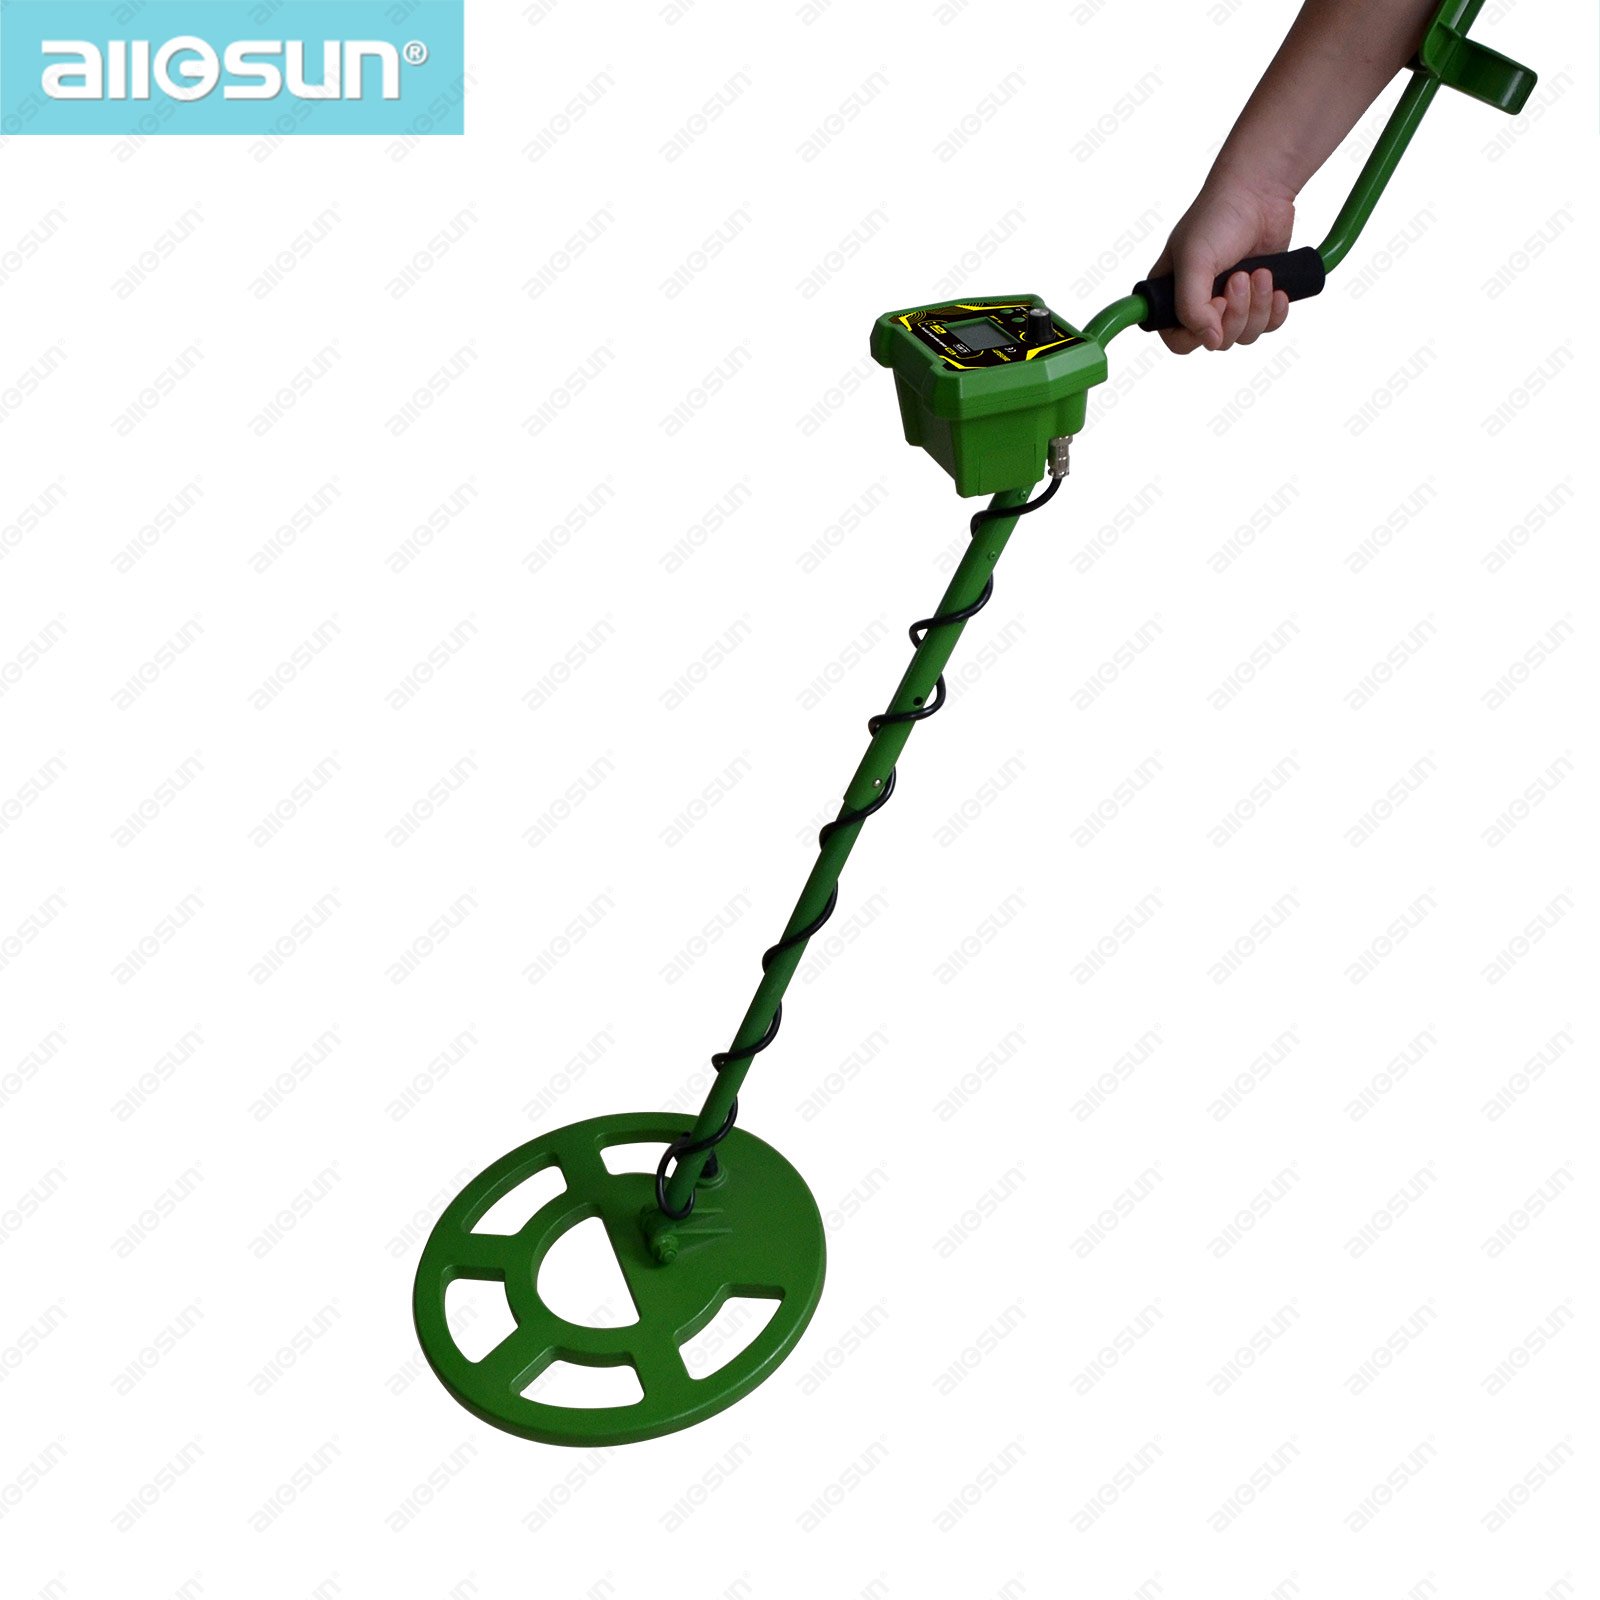 TS166A Newest Underground Metal Detector Treasure Hunter Practical Metal Detector with High- Pecision